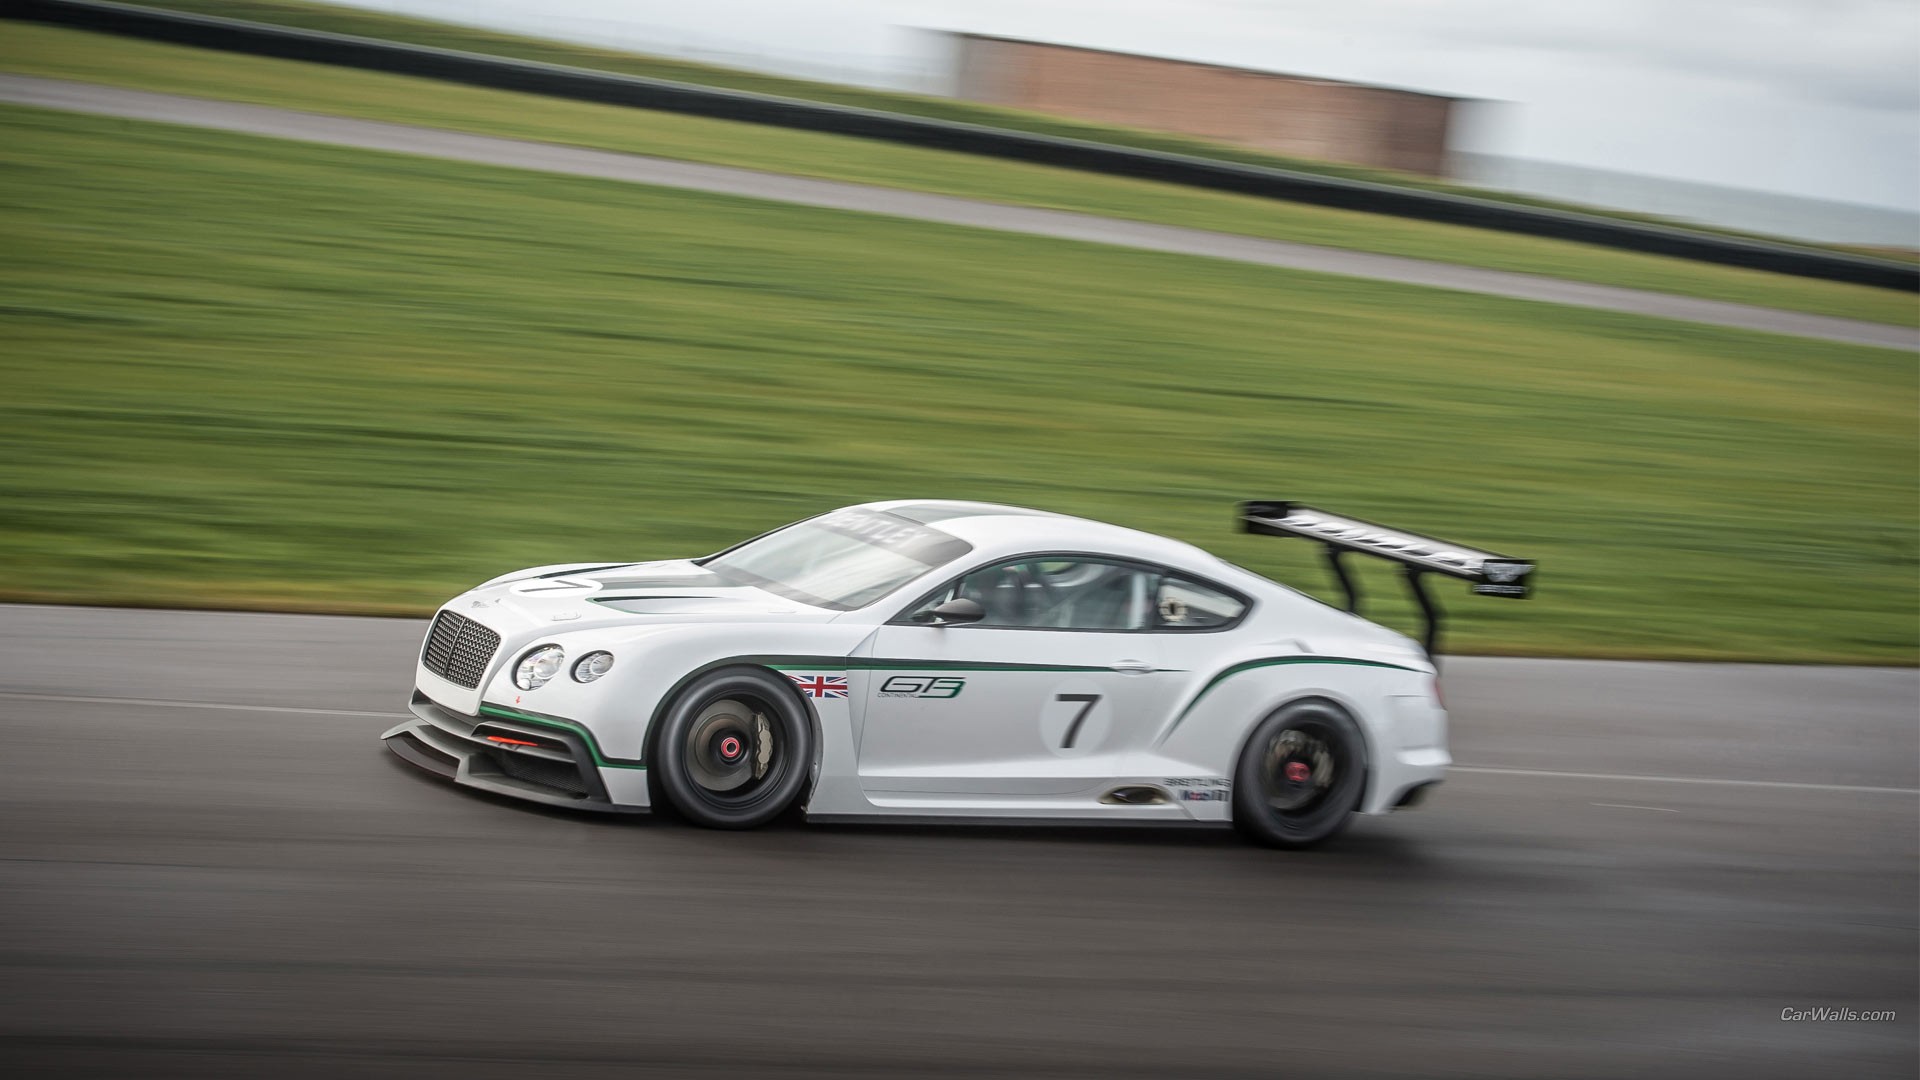 Bentley Continental GT3 Car Race Cars White Cars Bentley 1920x1080